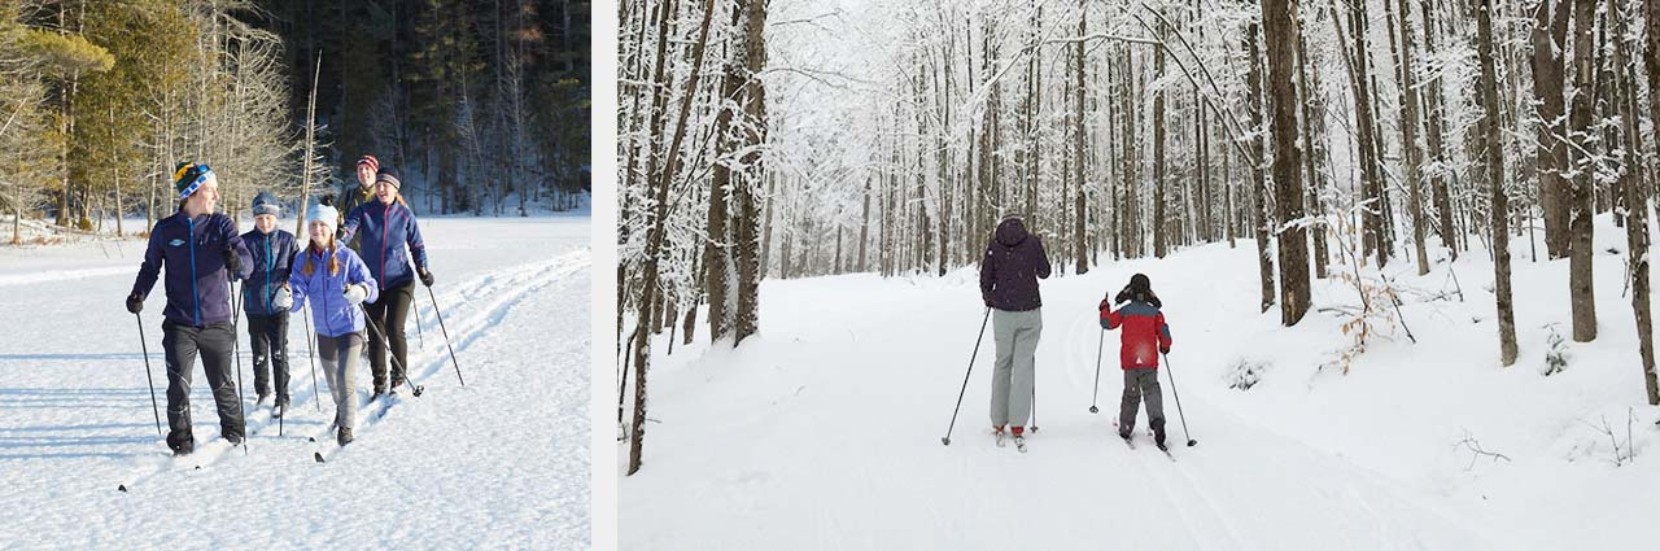 Family cross country skiing and a mother and son cross country skiing through the wintry woods.